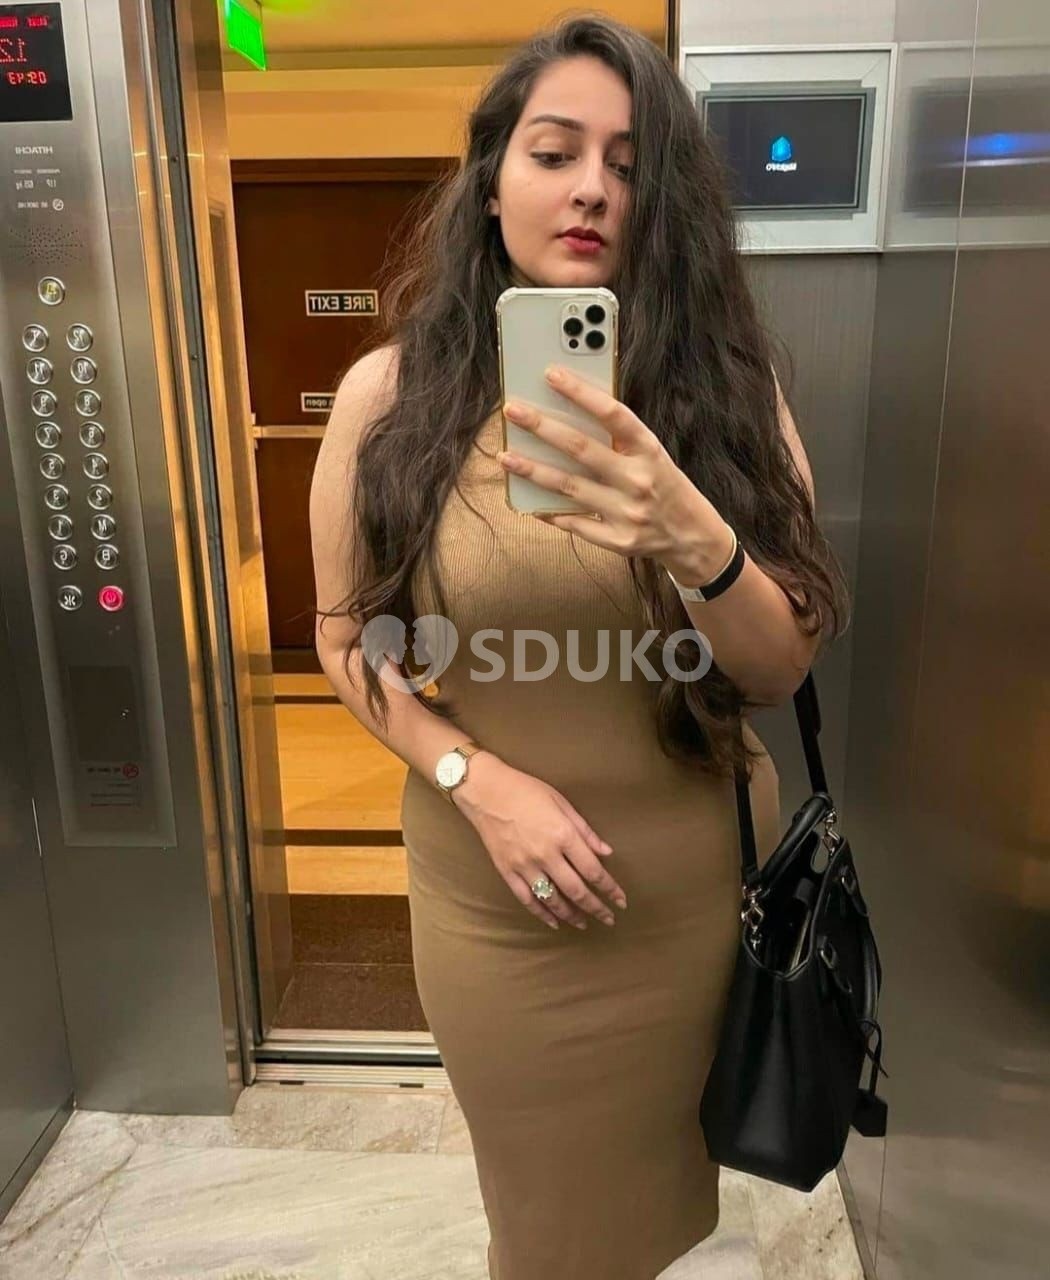 Patiala ✅ 24x7 AFFORDABLE CHEAPEST RATE SAFE CALL GIRL SERVICE AVAILABLE OUTCALL AVAILABLE.... .